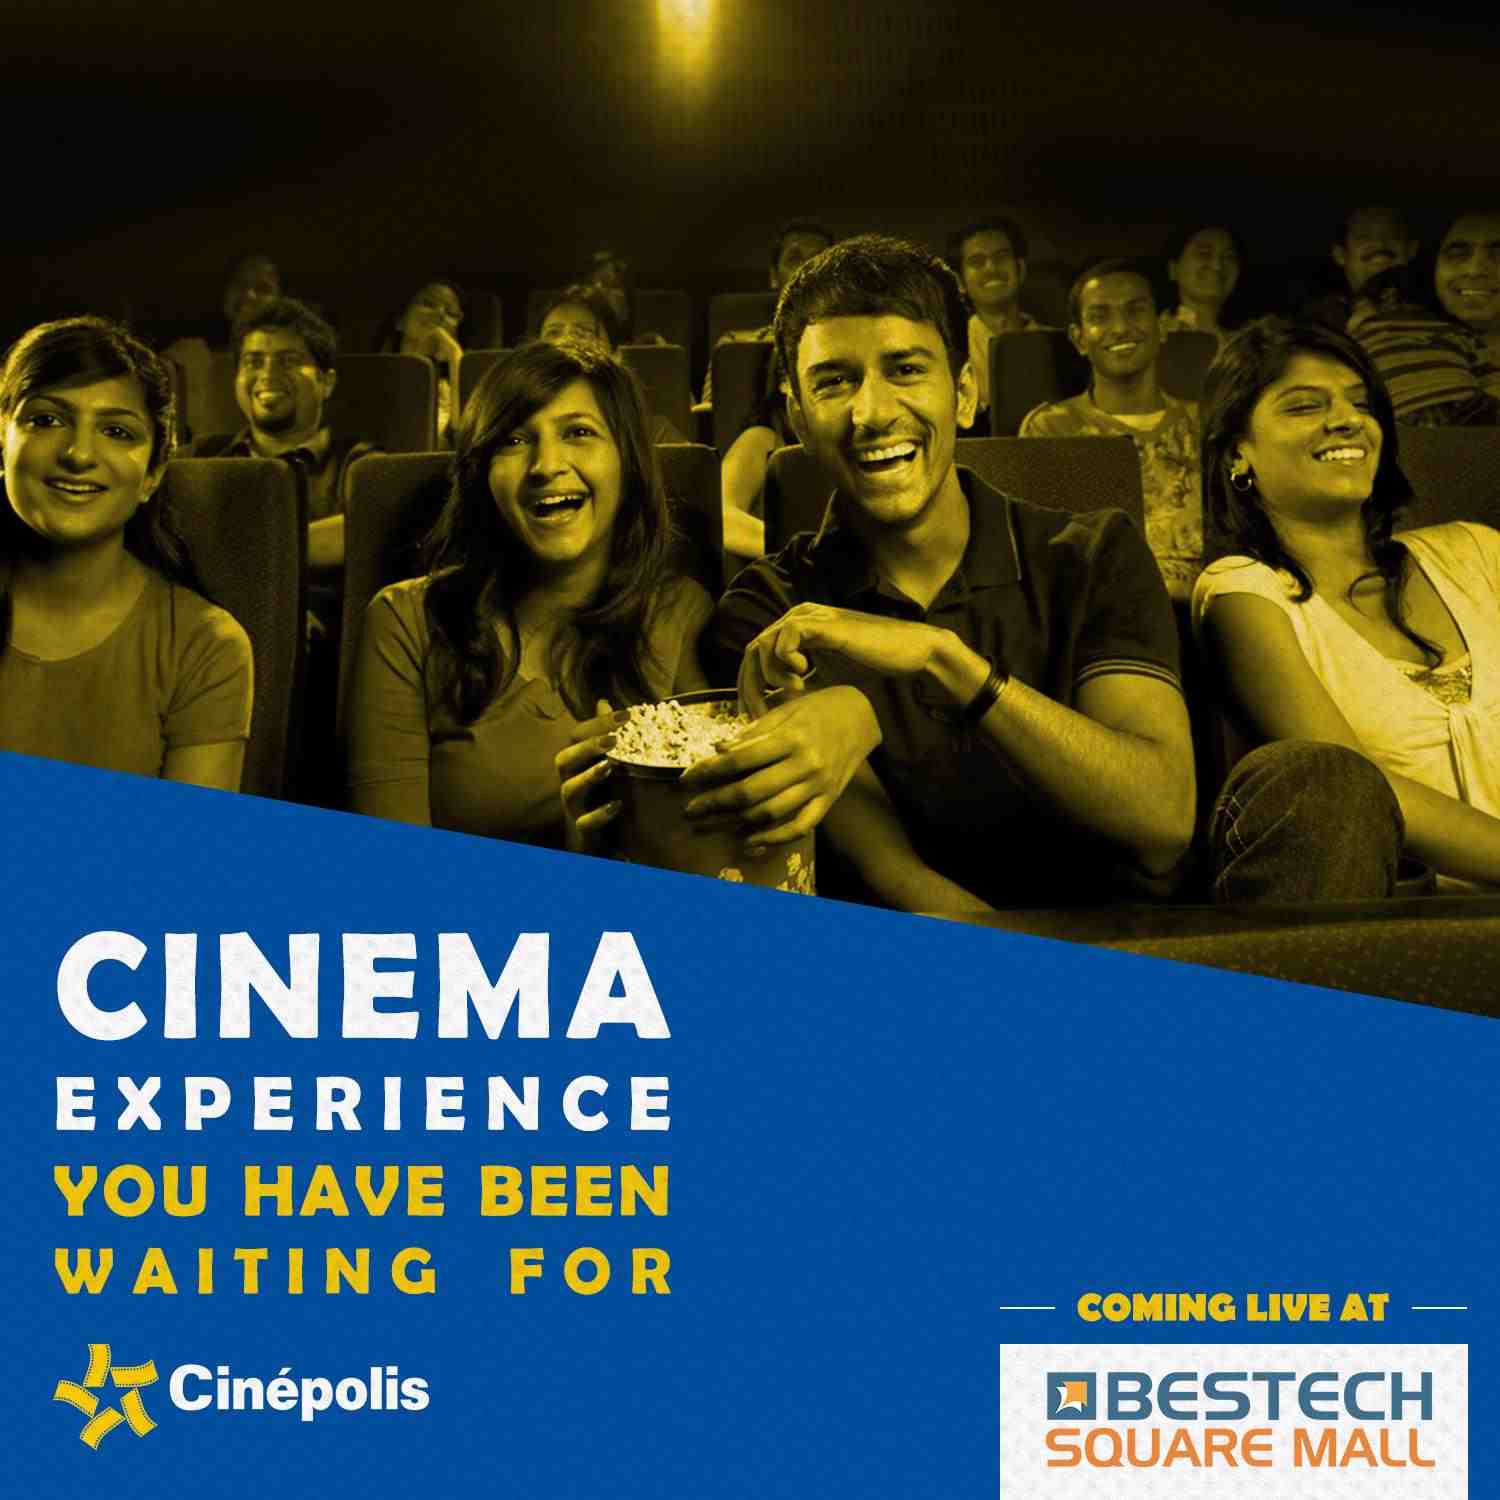 Watch all the new releases every weekend in Cinepolis at Bestech Square Mall in Mohali